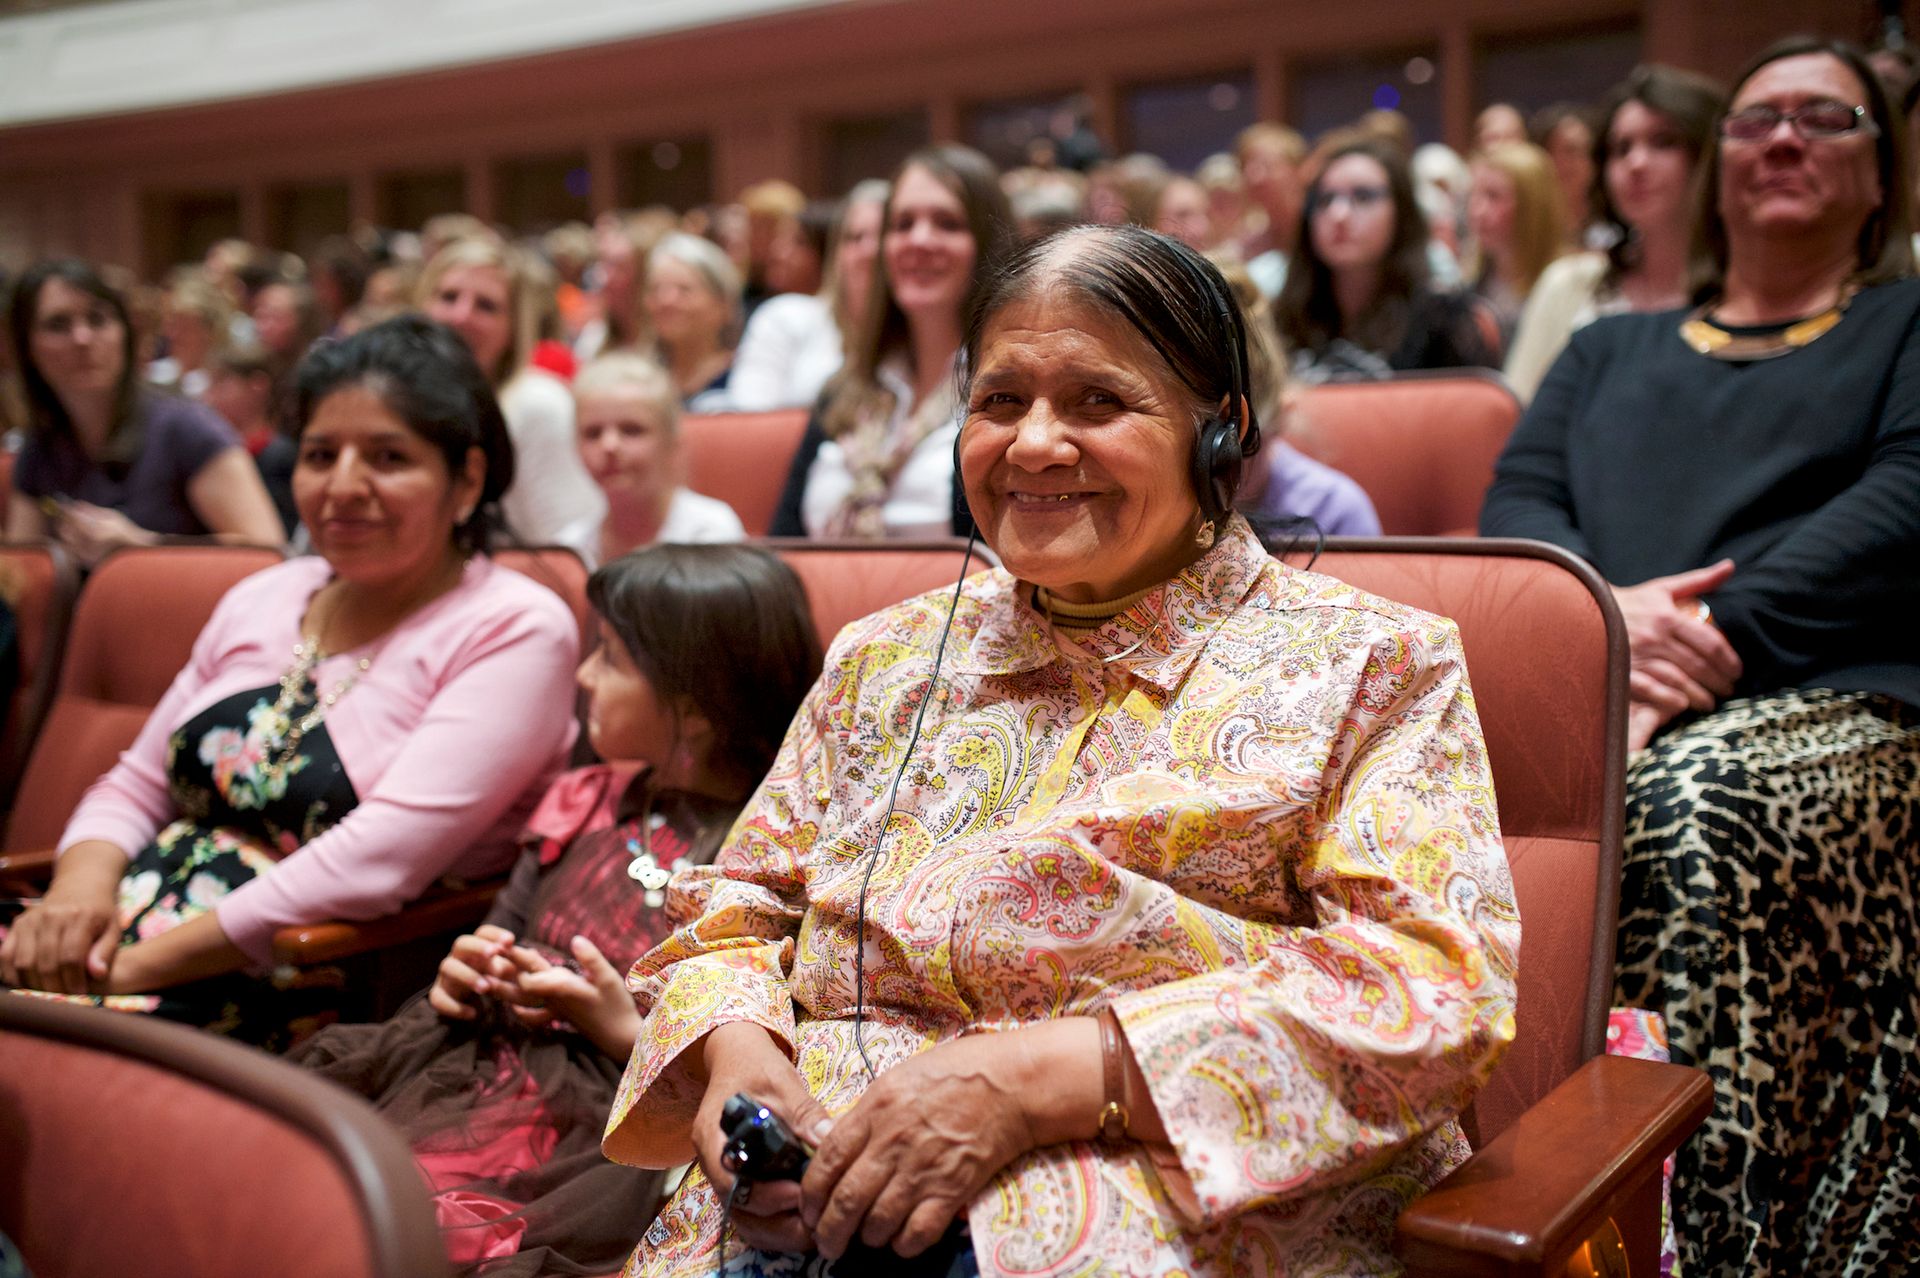 A group of women attend the general women’s session of general conference at the Conference Center.